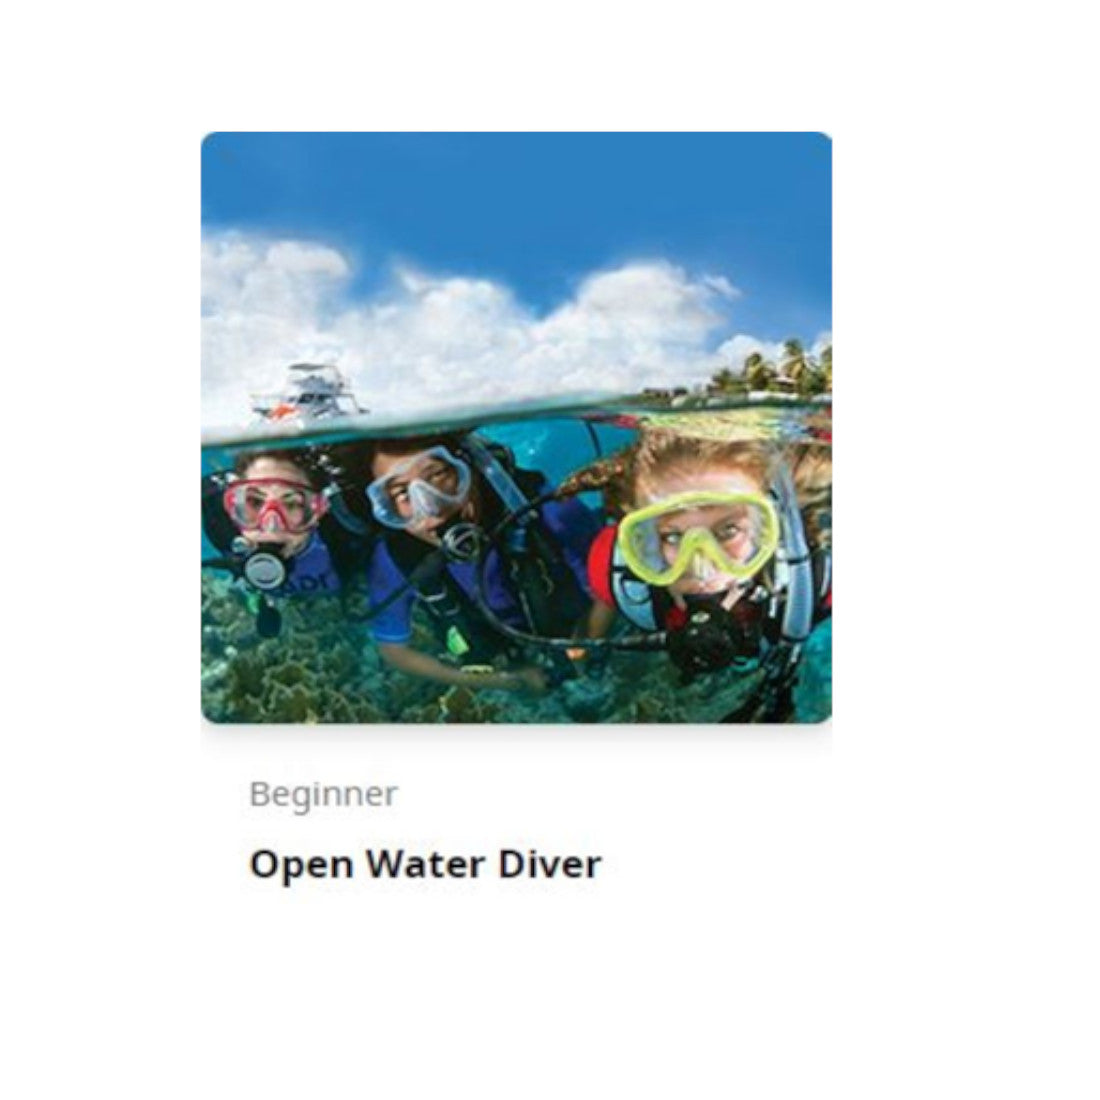 Padi eLearning Open Water Diver Course Study Material Book For Scuba D